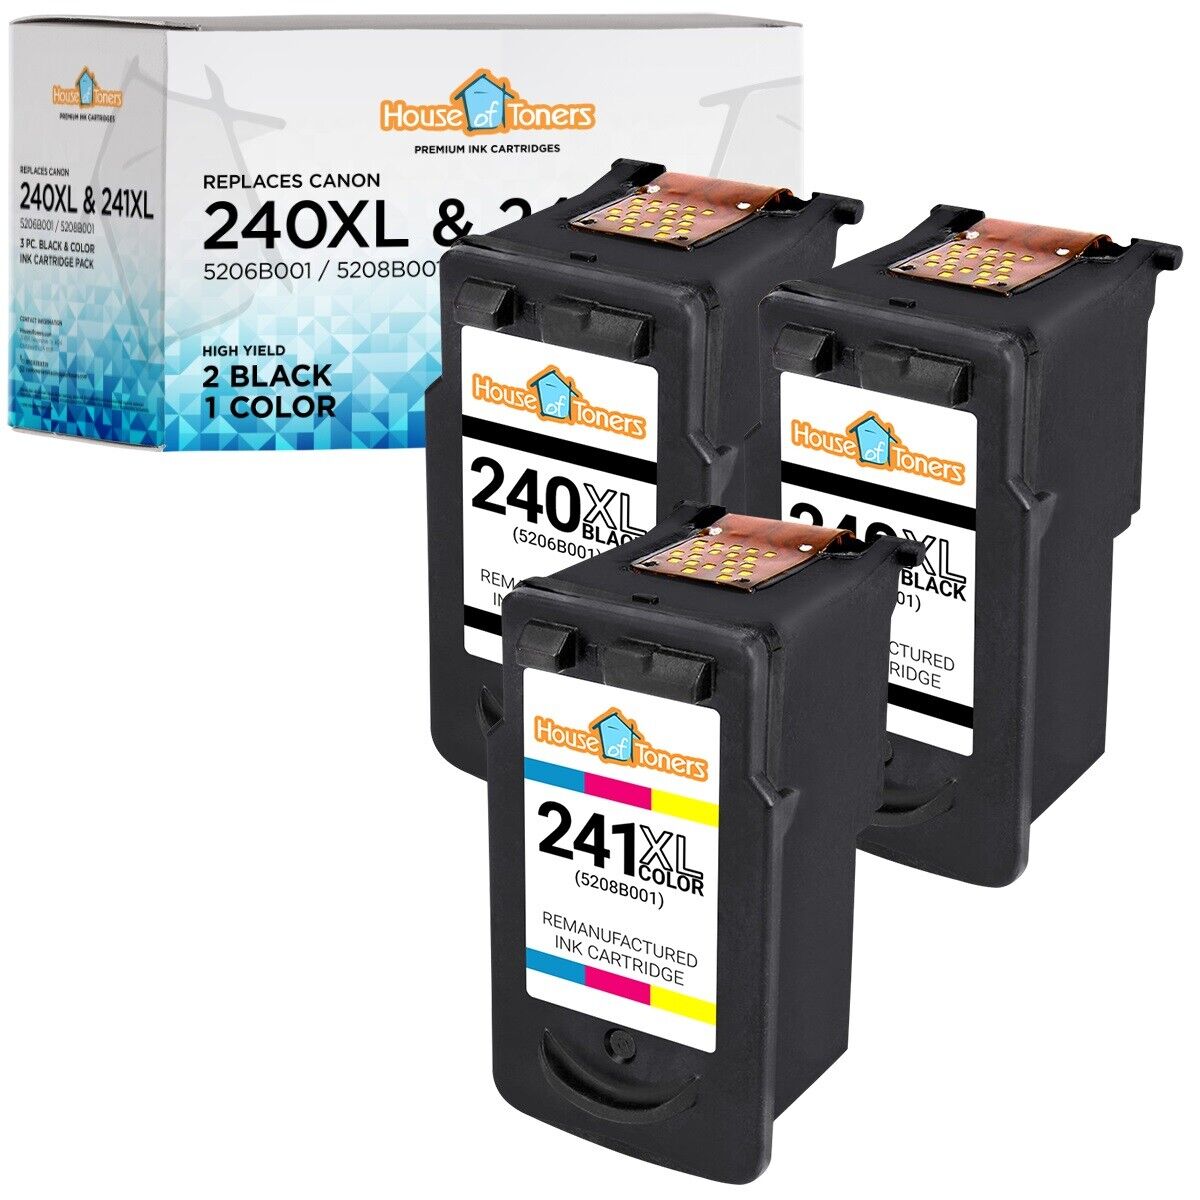 3PK PG 240XL CL 241XL Ink Cartridge for Canon PIXMA MG and MX Series Printer